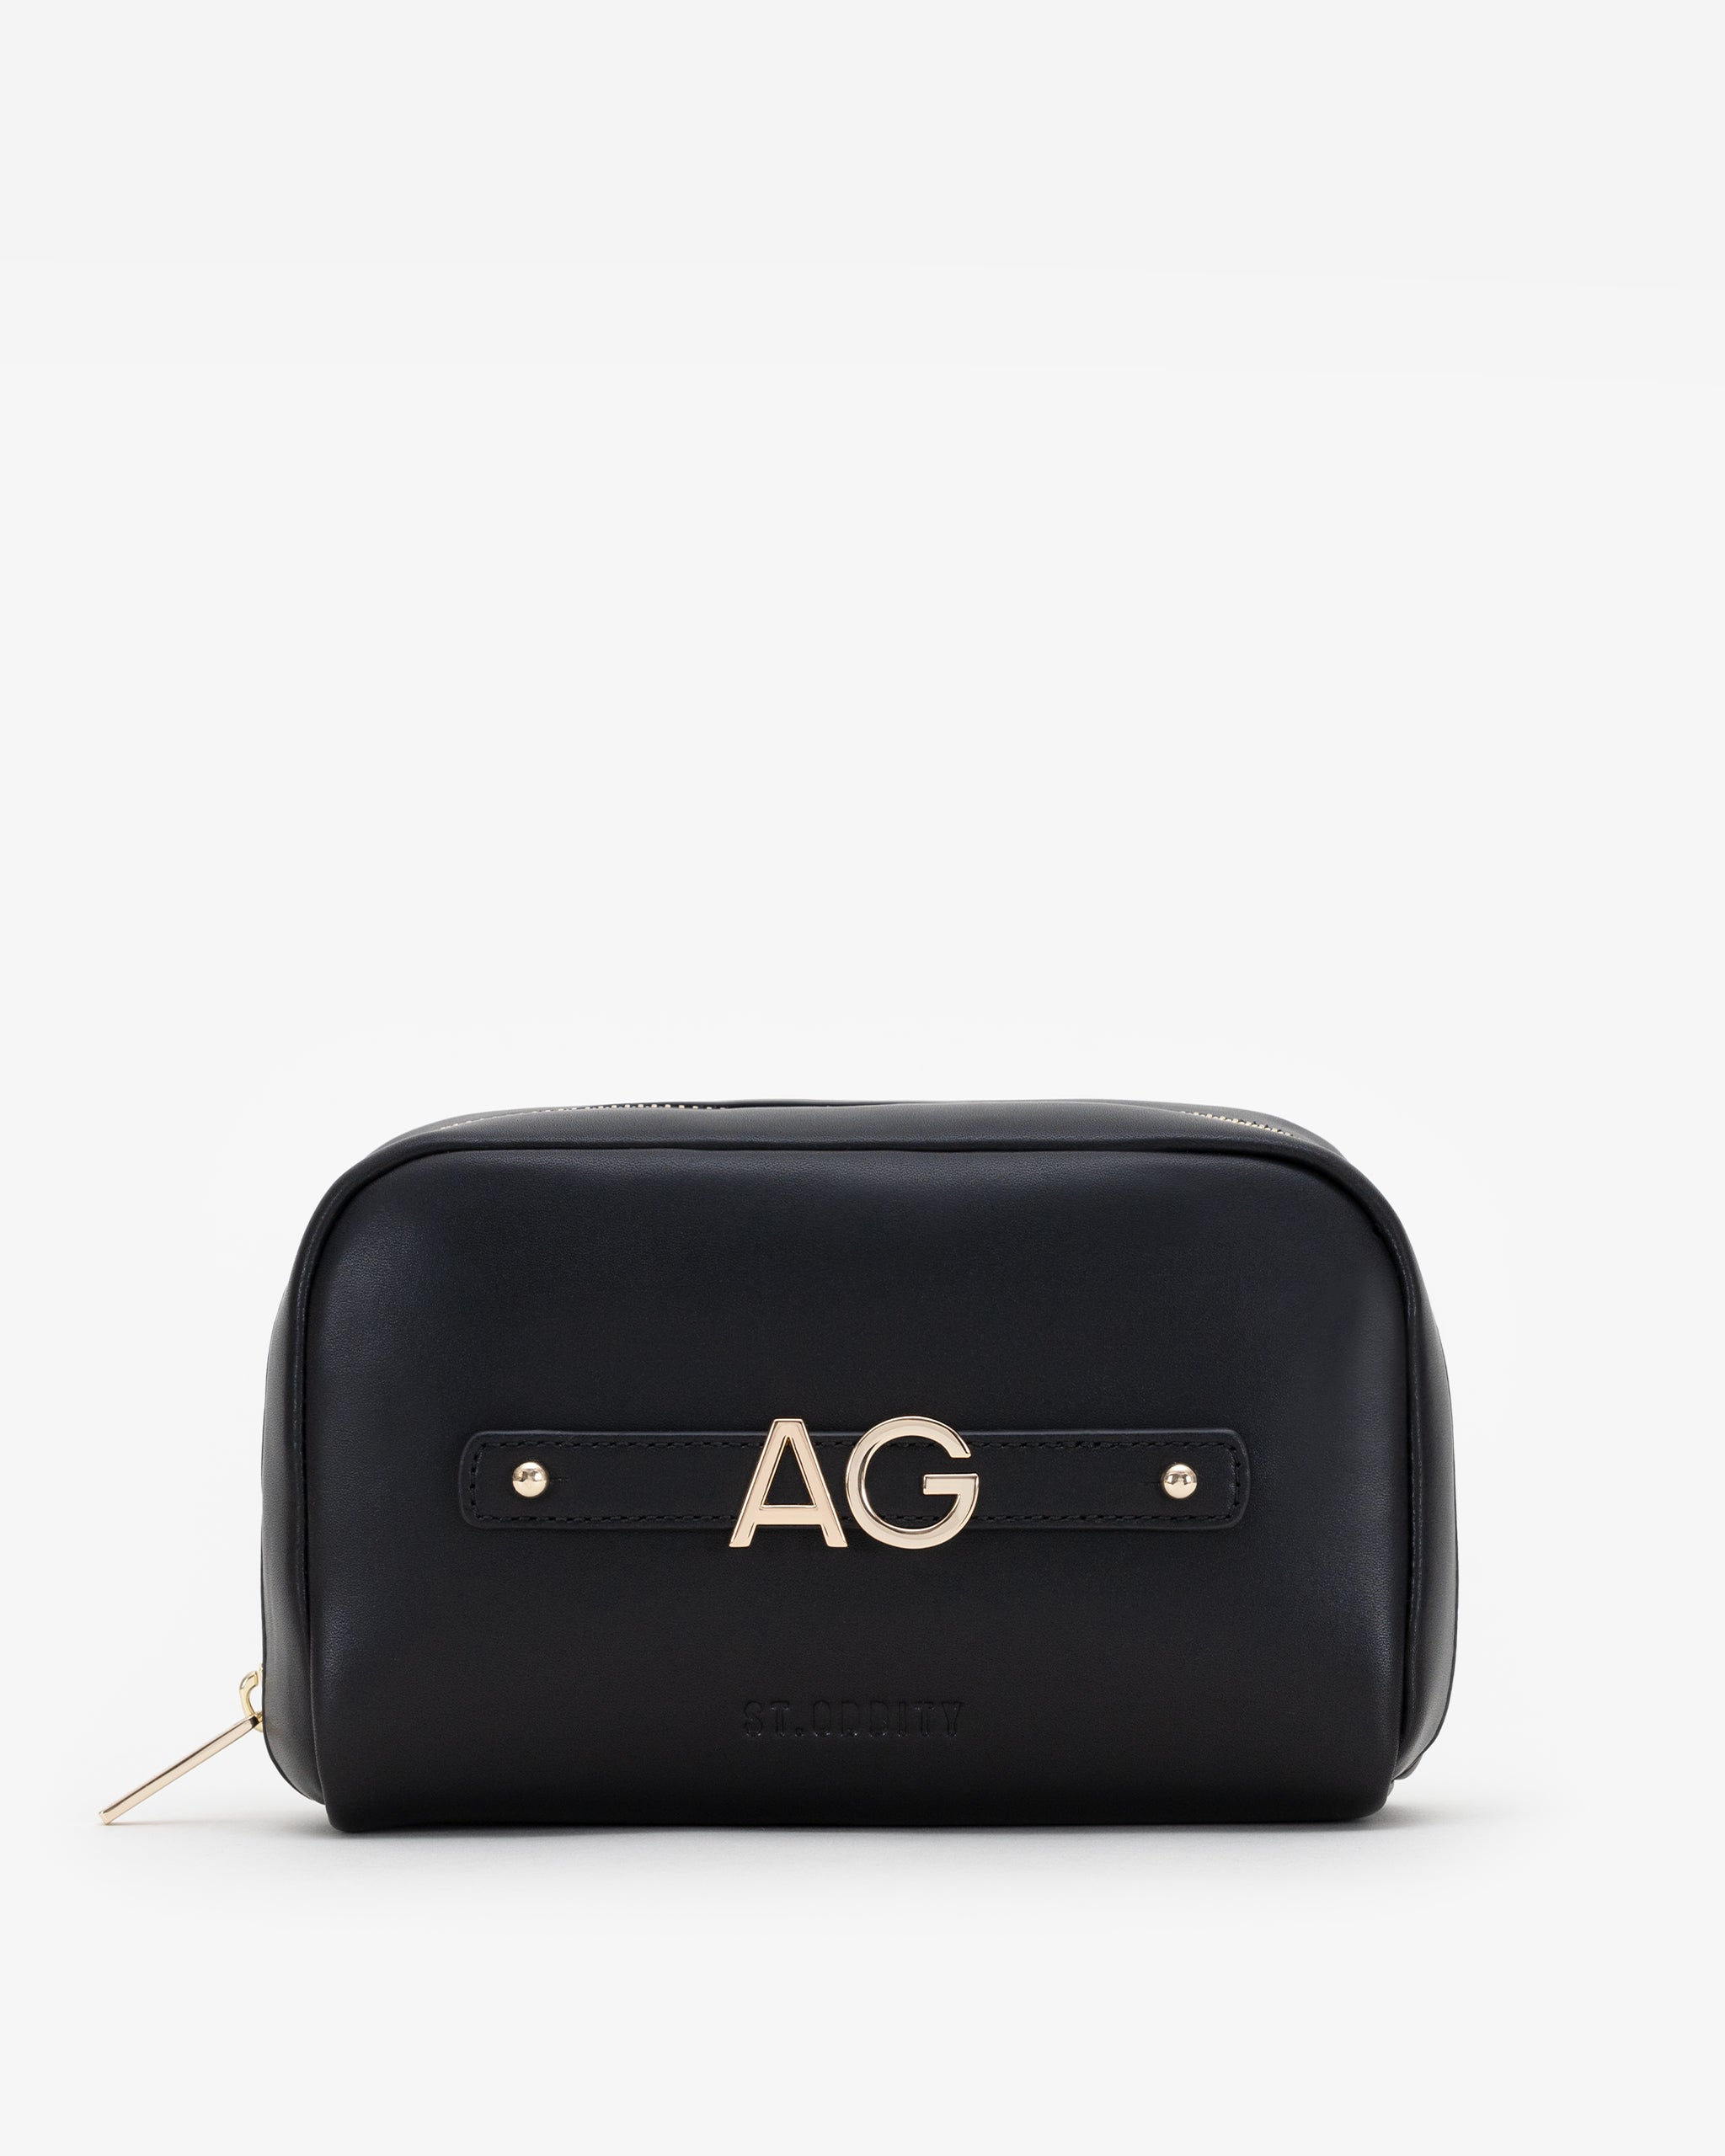 Pre-order (Mid-May): Cosmetic Pouch in Black/Gold with Personalised Hardware